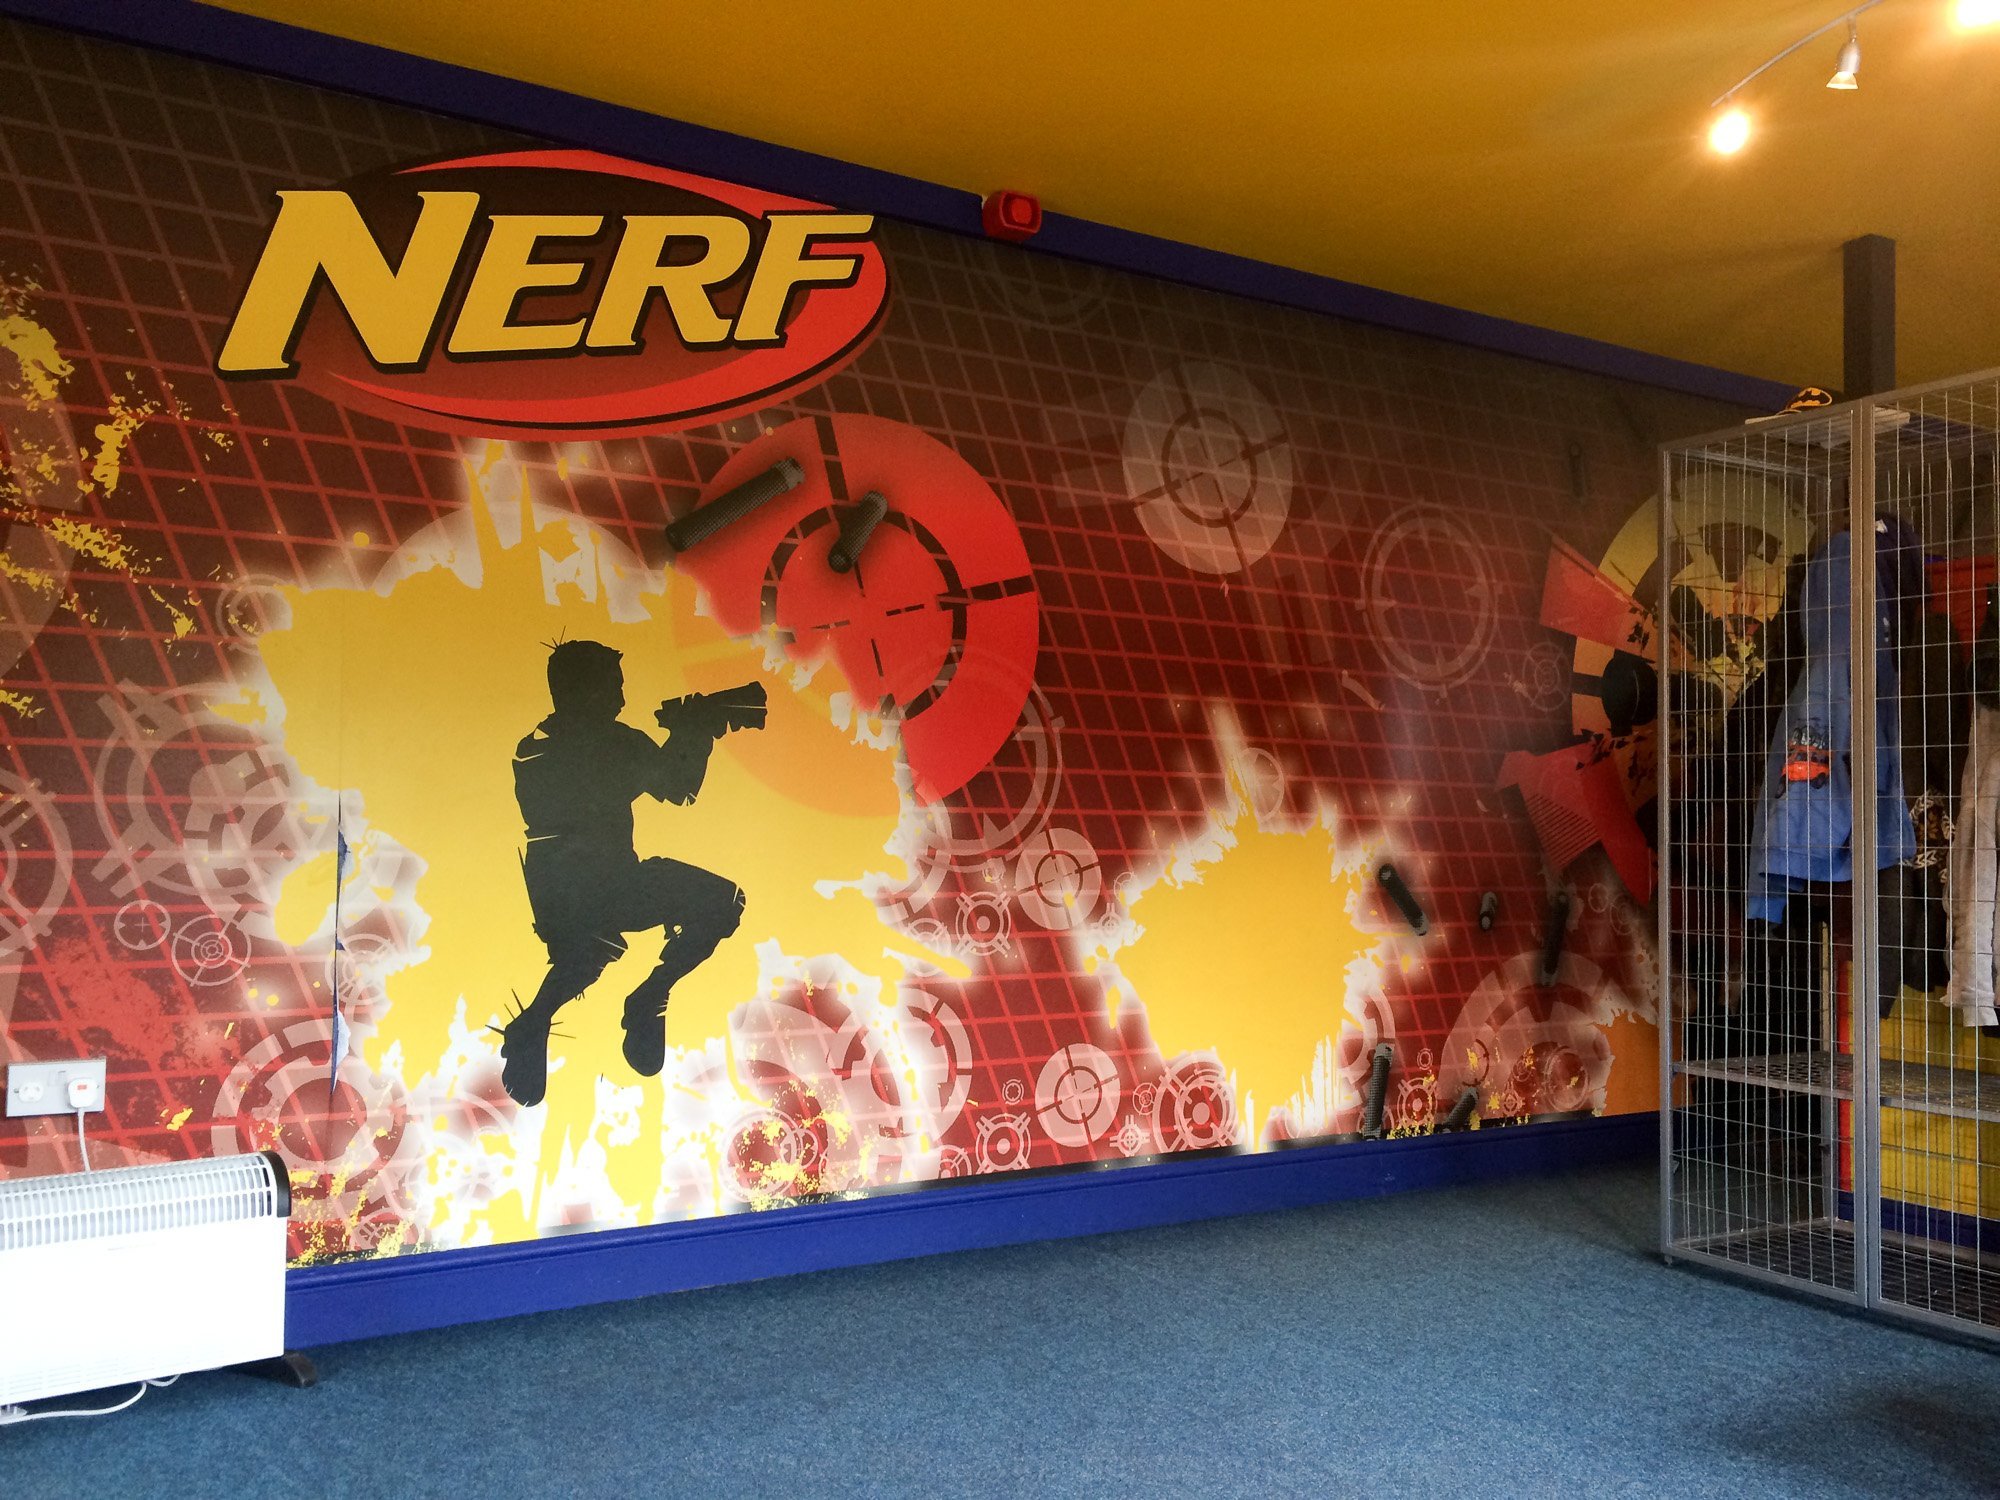 The Nerf Zone for your little sharp shooters